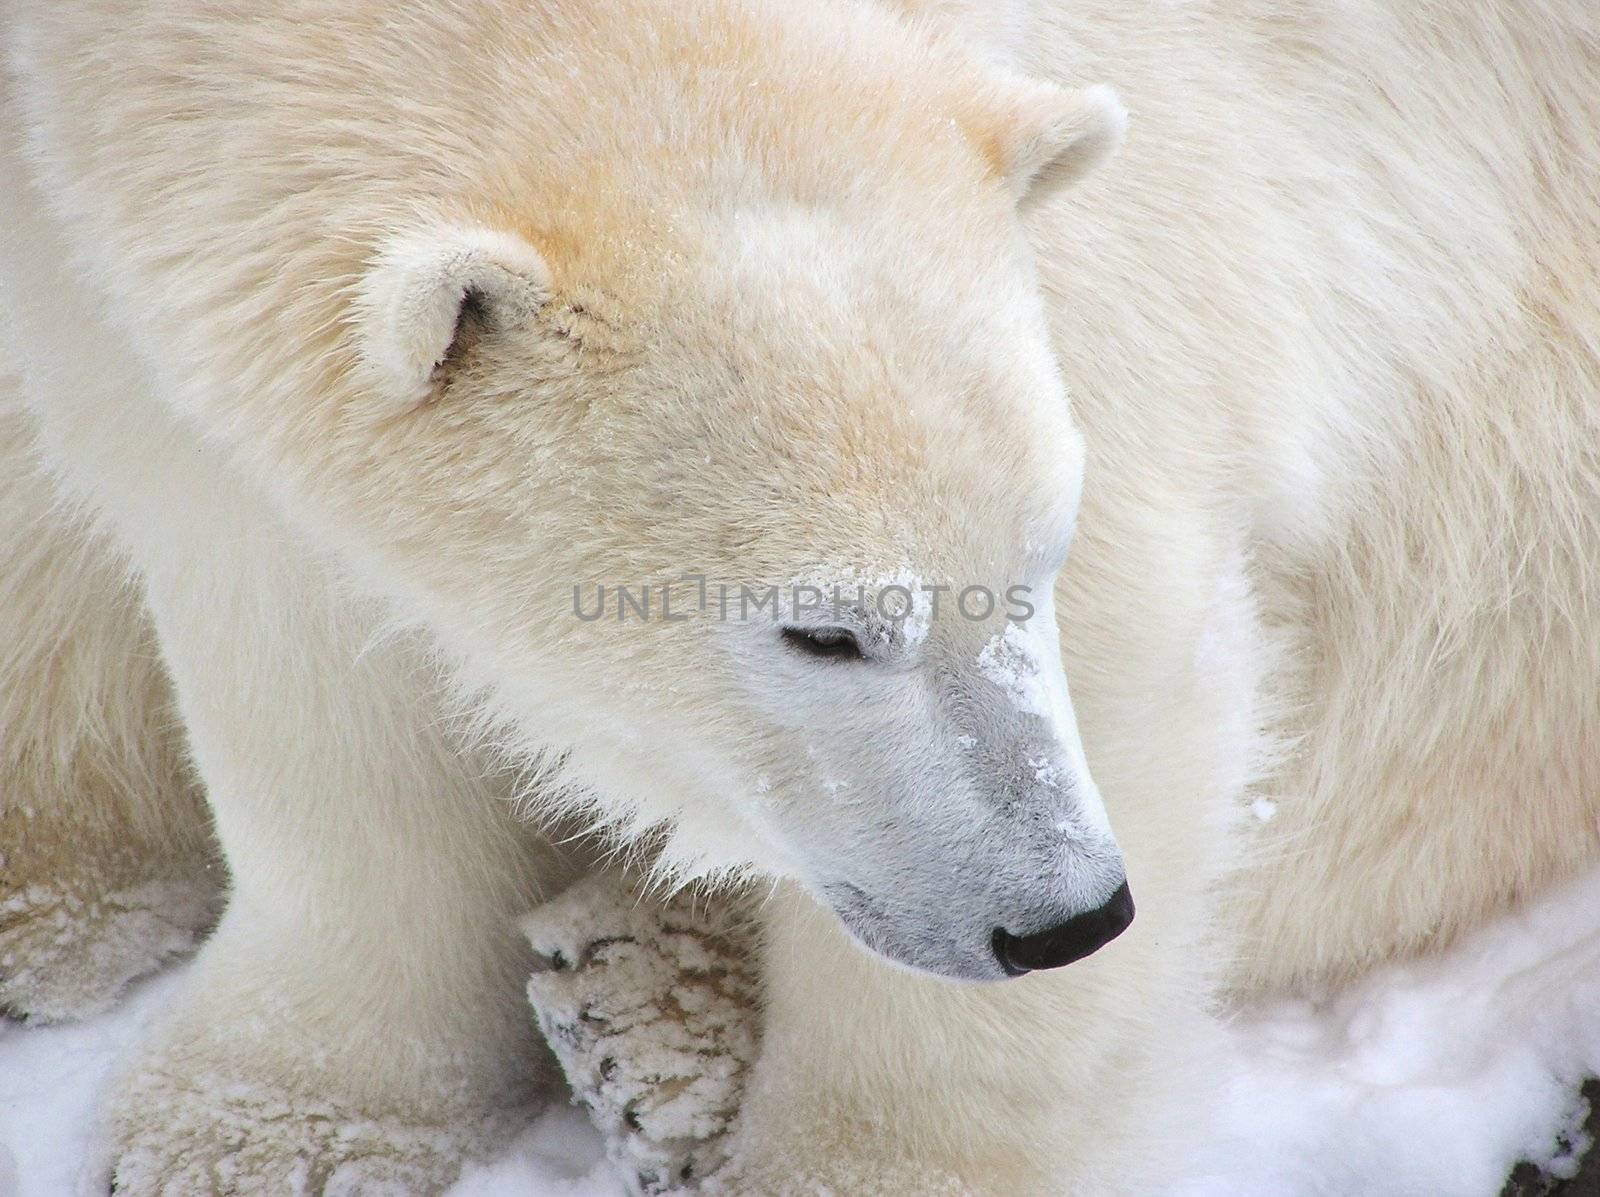 Close-up of a polar bear filling the frame with fur and snow on the nose details well shown